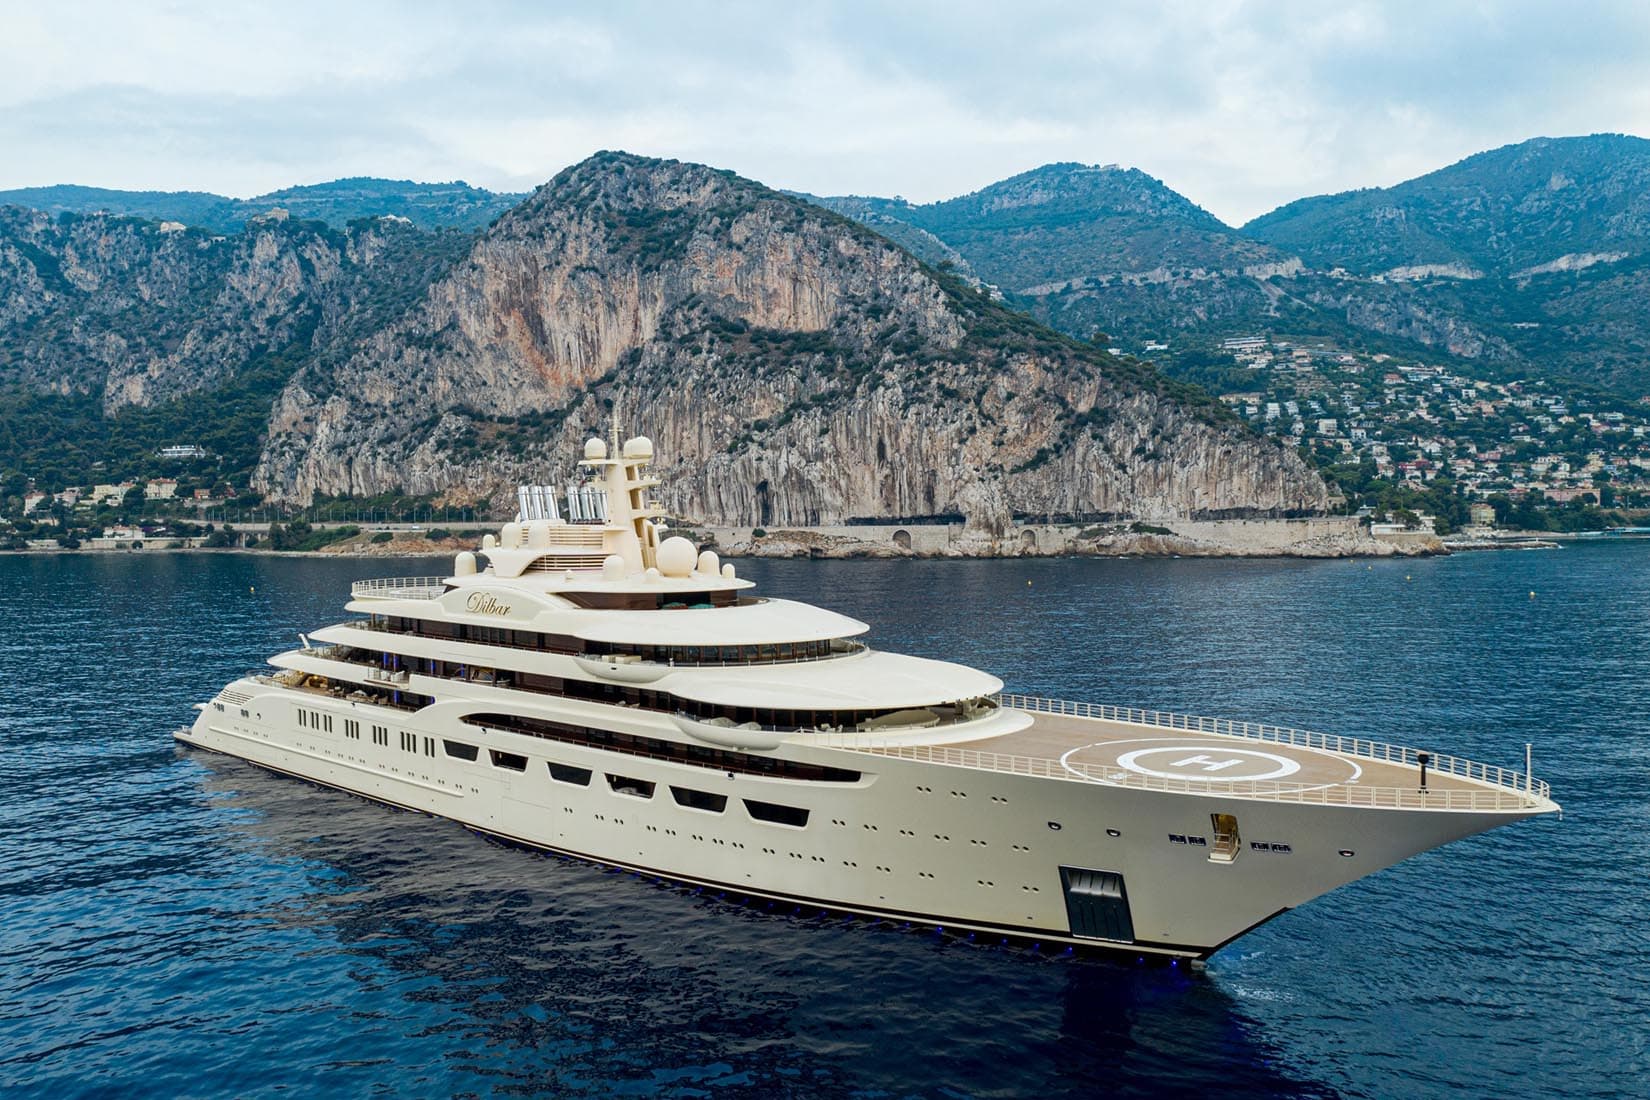 21 Largest & Most Expensive Yachts In The World (Ranking)